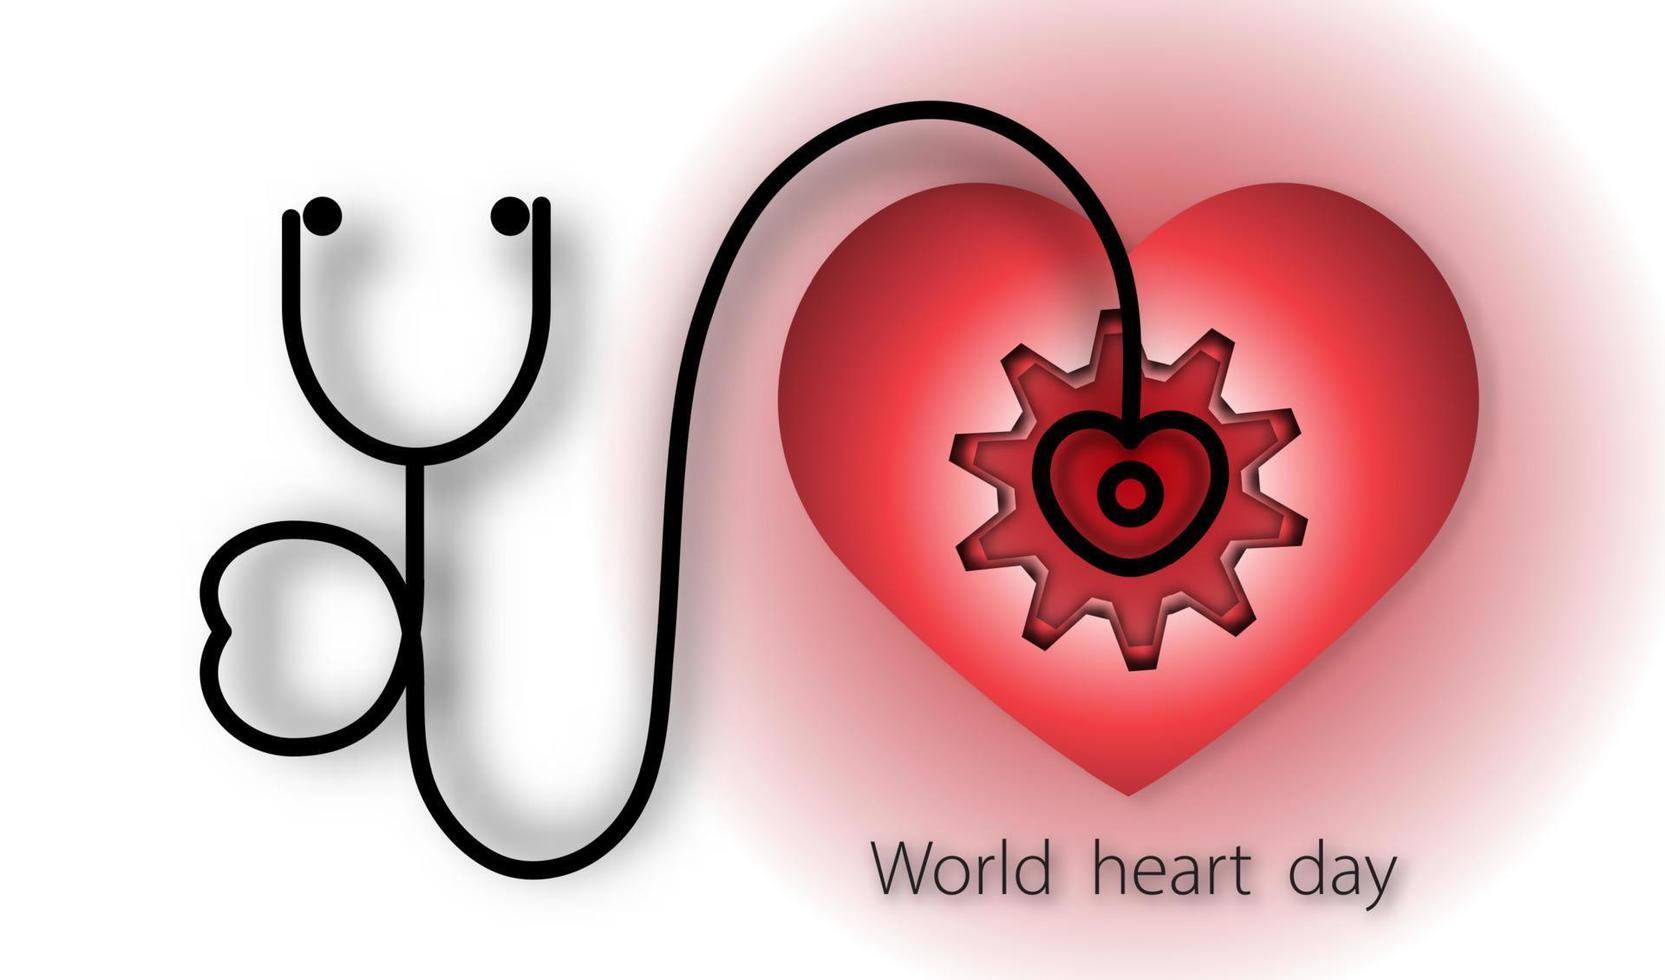 World heart day with heart and stethoscope and gear on red background of paper art style ,vector or illustration with health love concept vector